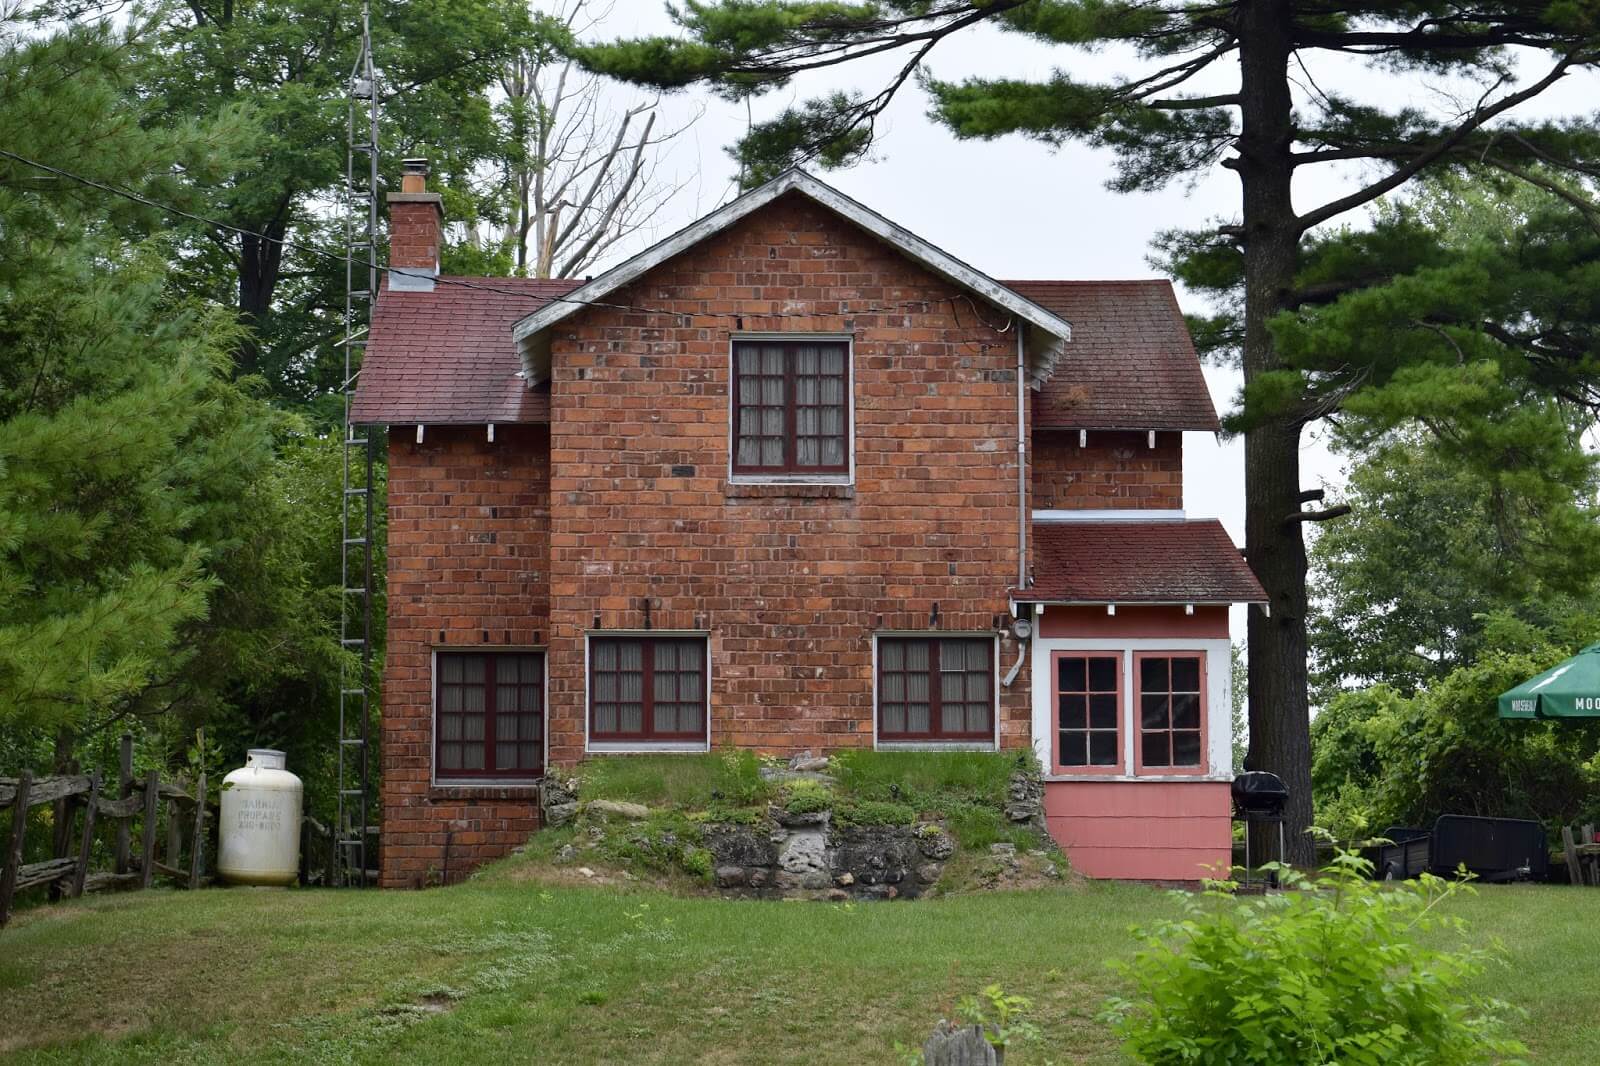 An image of a rare cottage building made of red brick at Rondeau